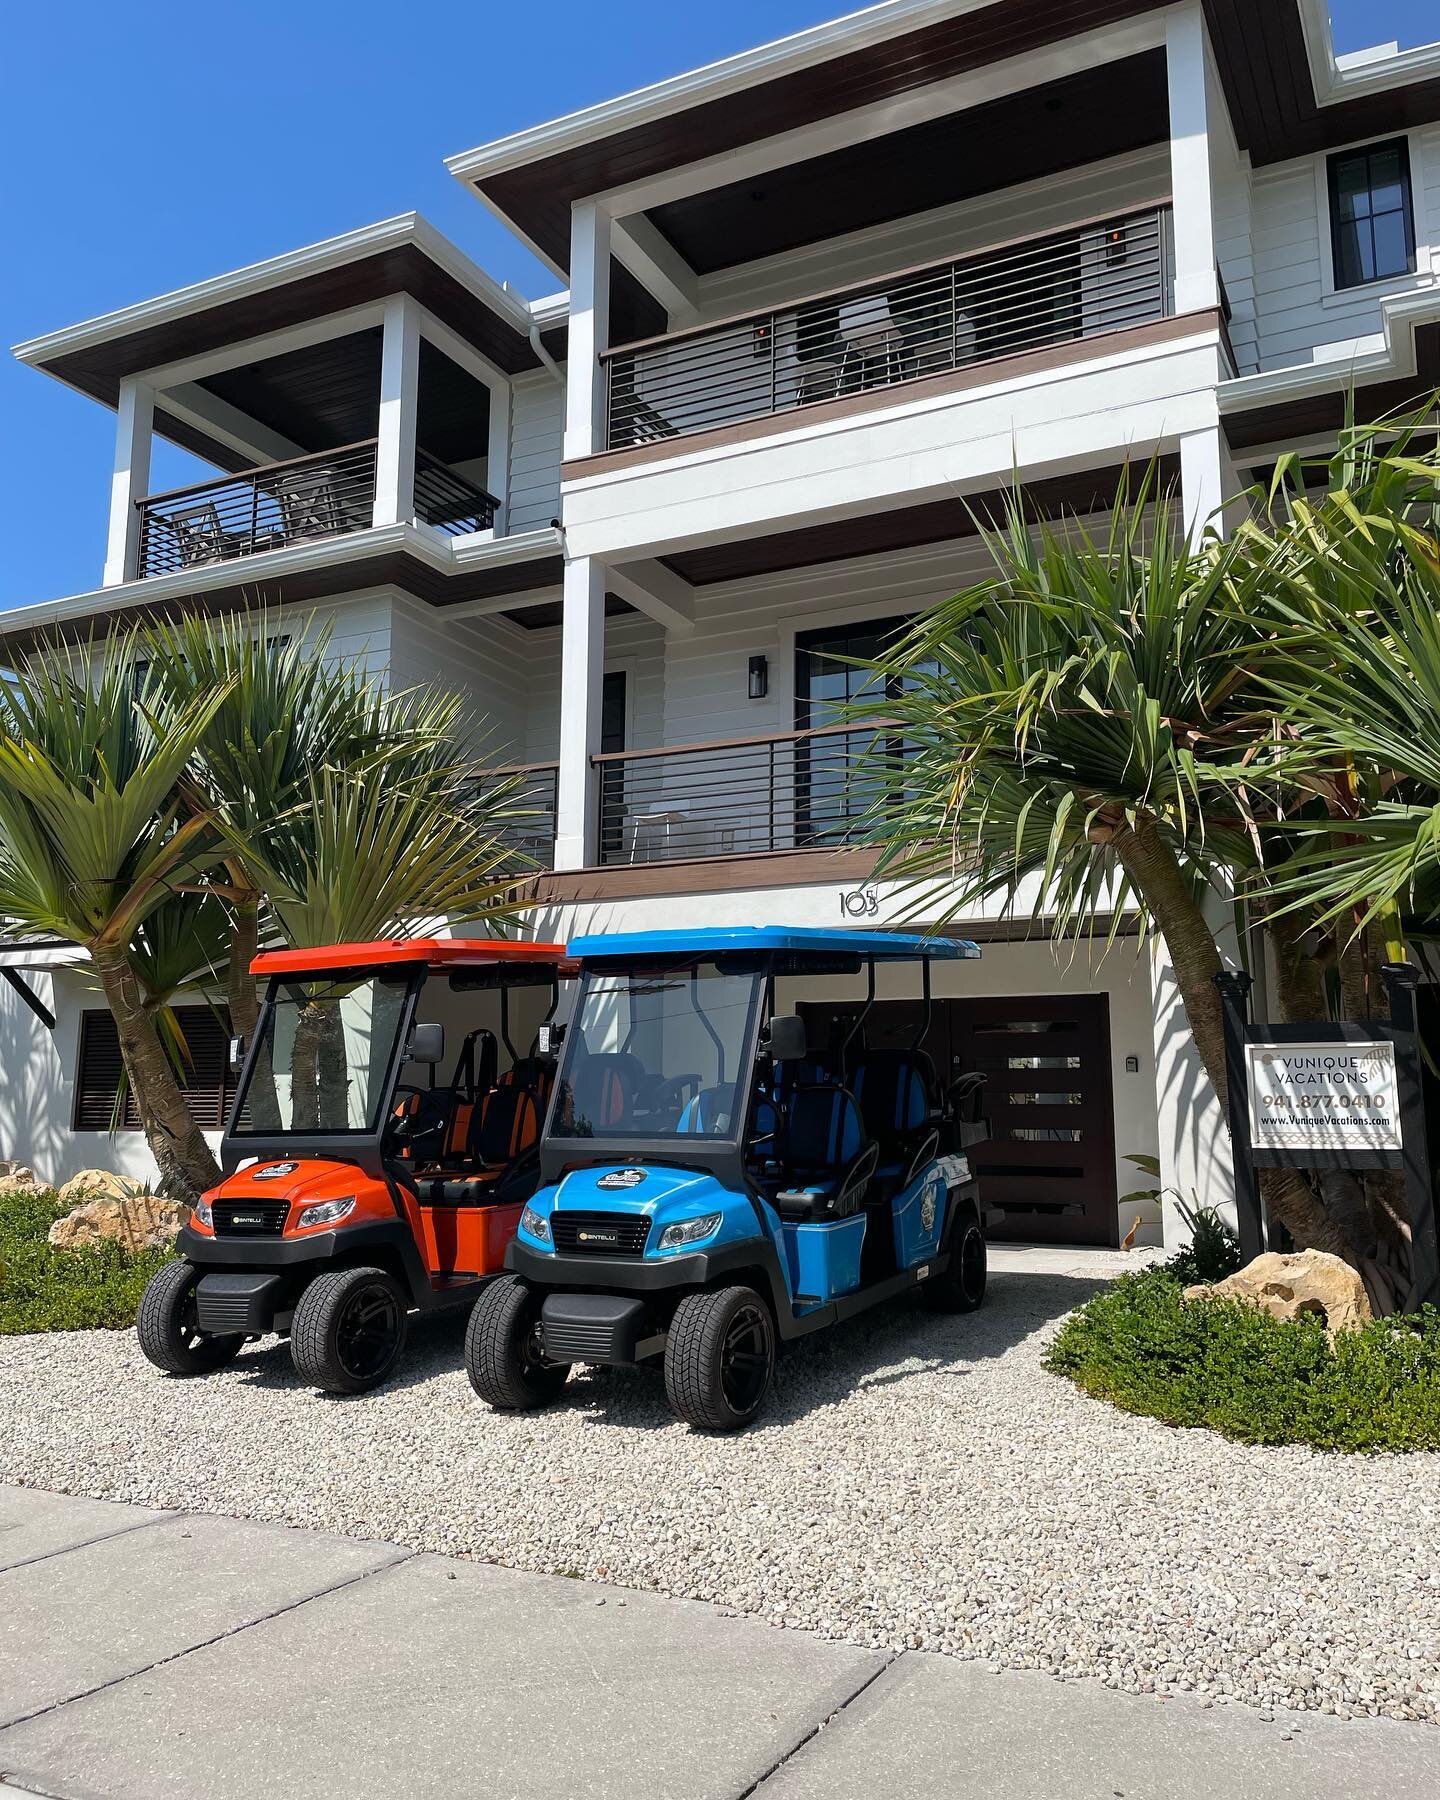 Spring Break is officially underway in Siesta Key! Our all electric golf carts are an amazing alternative to free rides and public transportation 🙌🏼🛺 #siestakey #goodvibesislandrides #springbreak DM us or go online to book